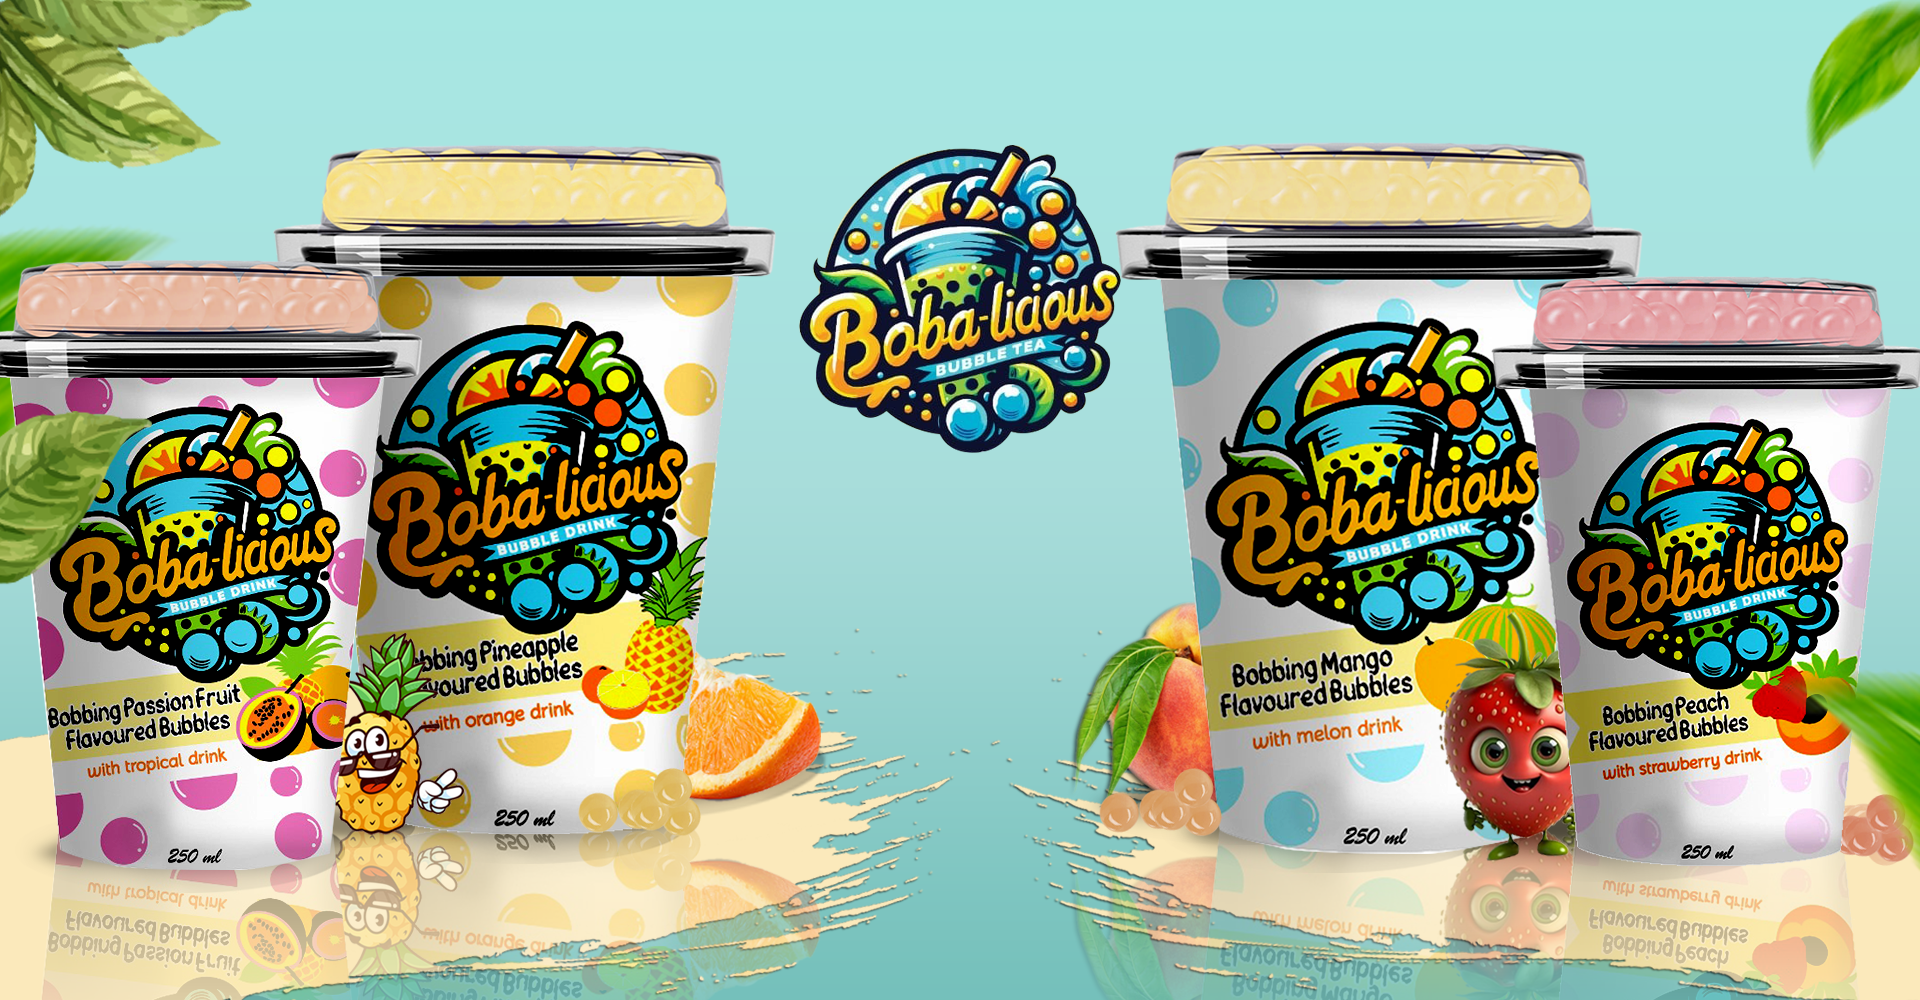 Refreshing BobaLicious fruit-flavored bubble drinks showcased against a sunny beach backdrop.